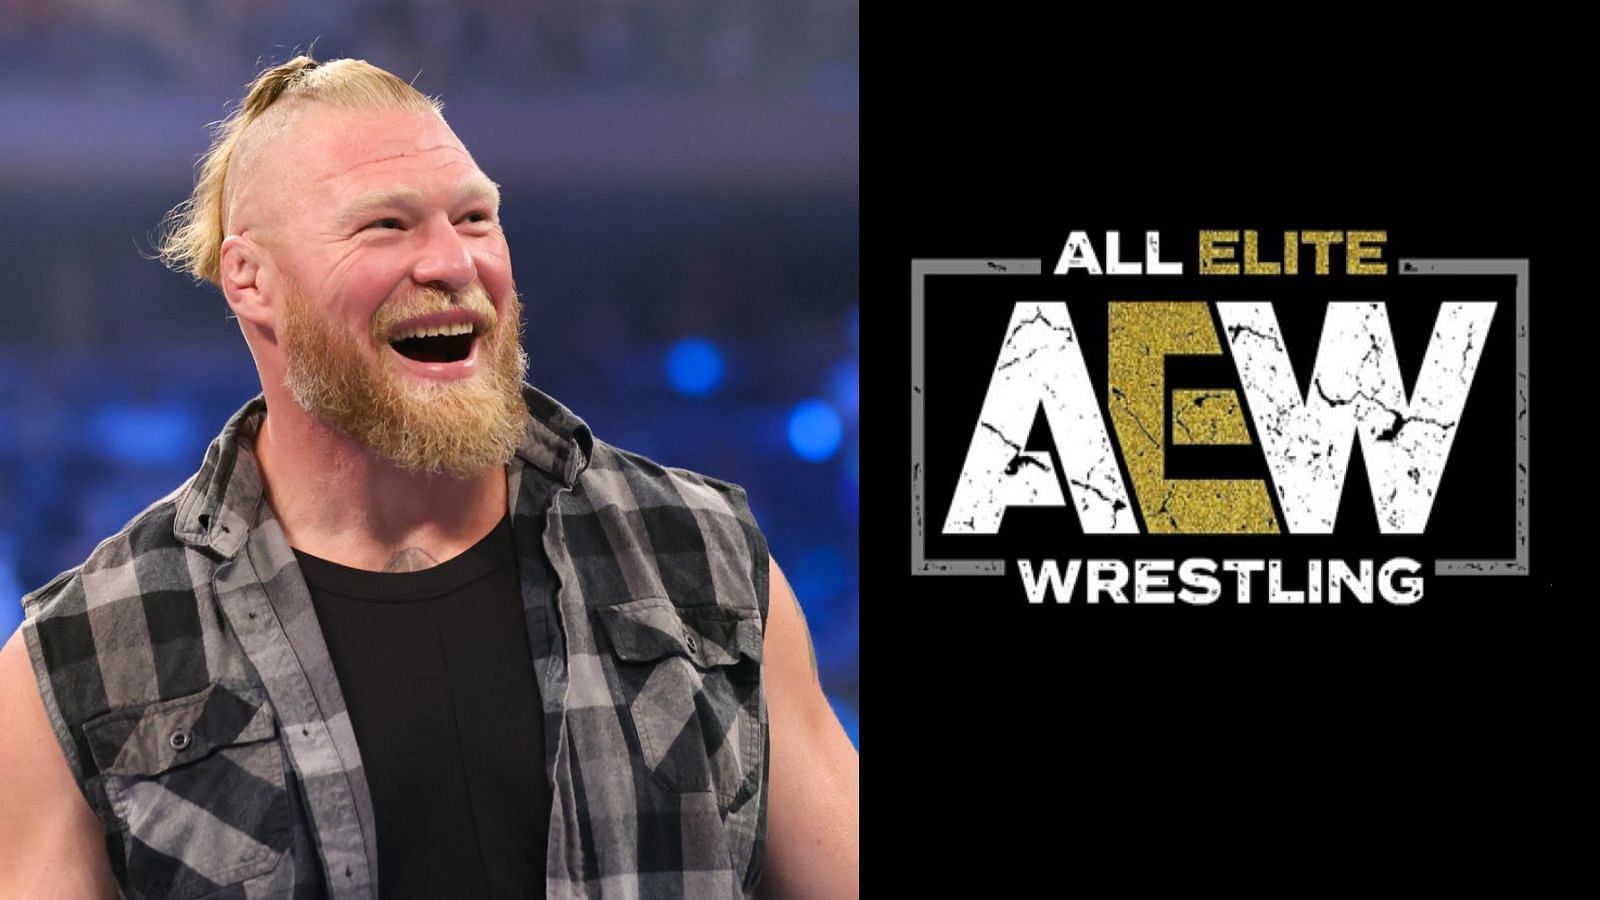 What did this AEW star have to say about Lesnar?